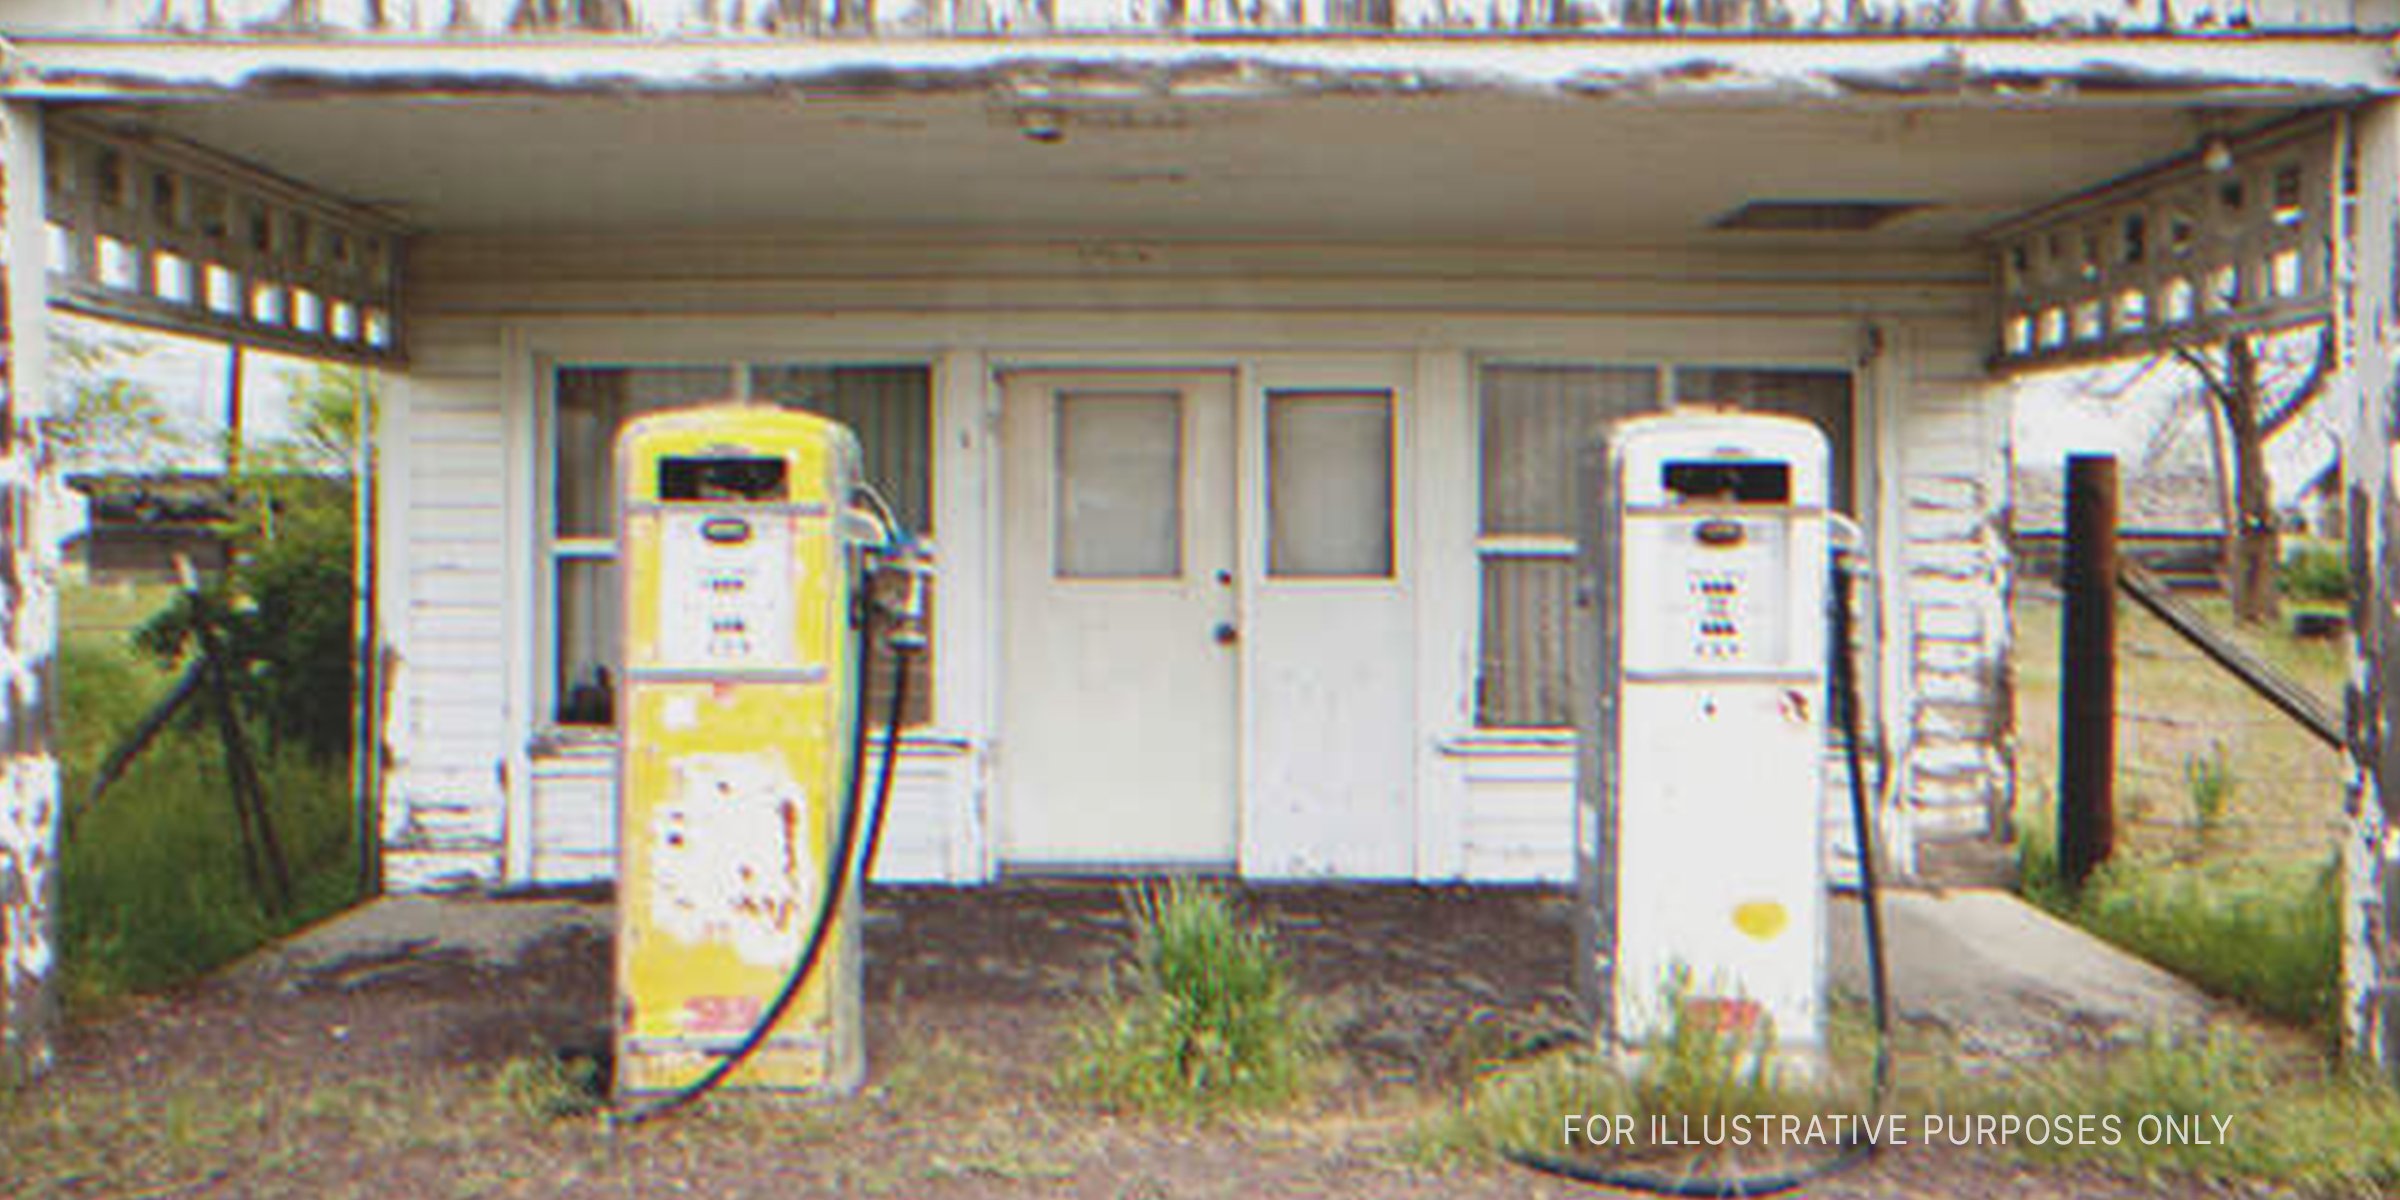 An abandoned gas station | Source: Getty Images